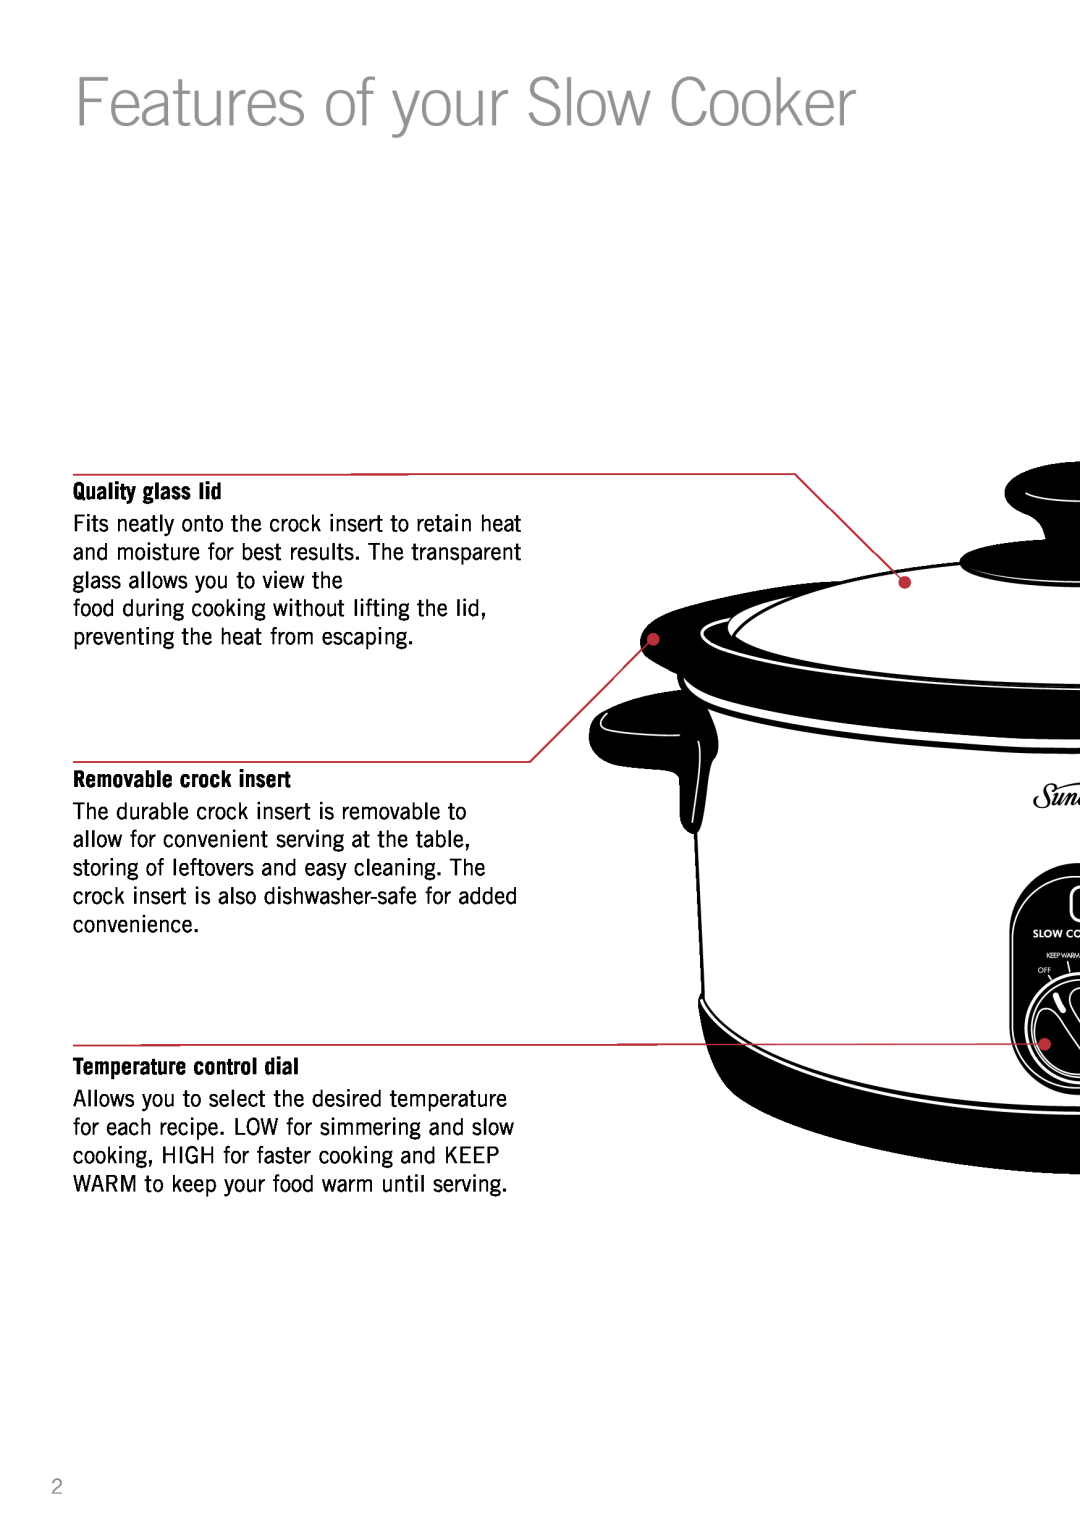 Sunbeam HP3510 manual Features of your Slow Cooker, Quality glass lid, Removable crock insert, Temperature control dial 